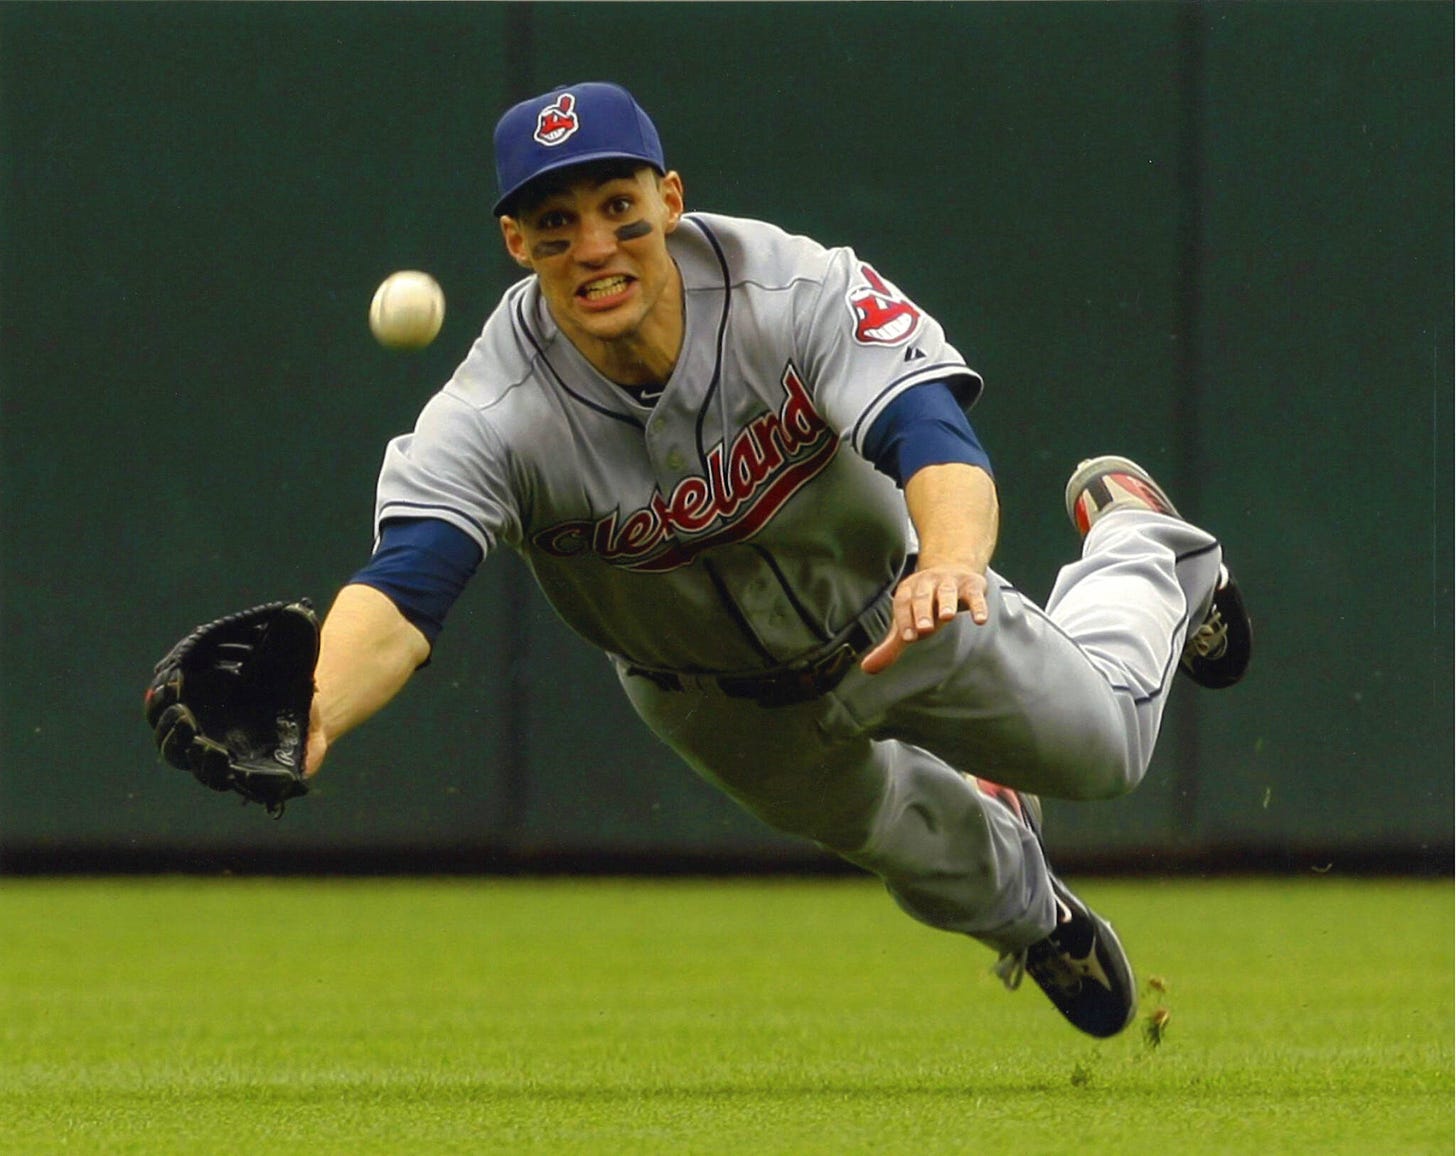 County Sports Hall of Fame Class of 2022: Grady Sizemore | HeraldNet.com